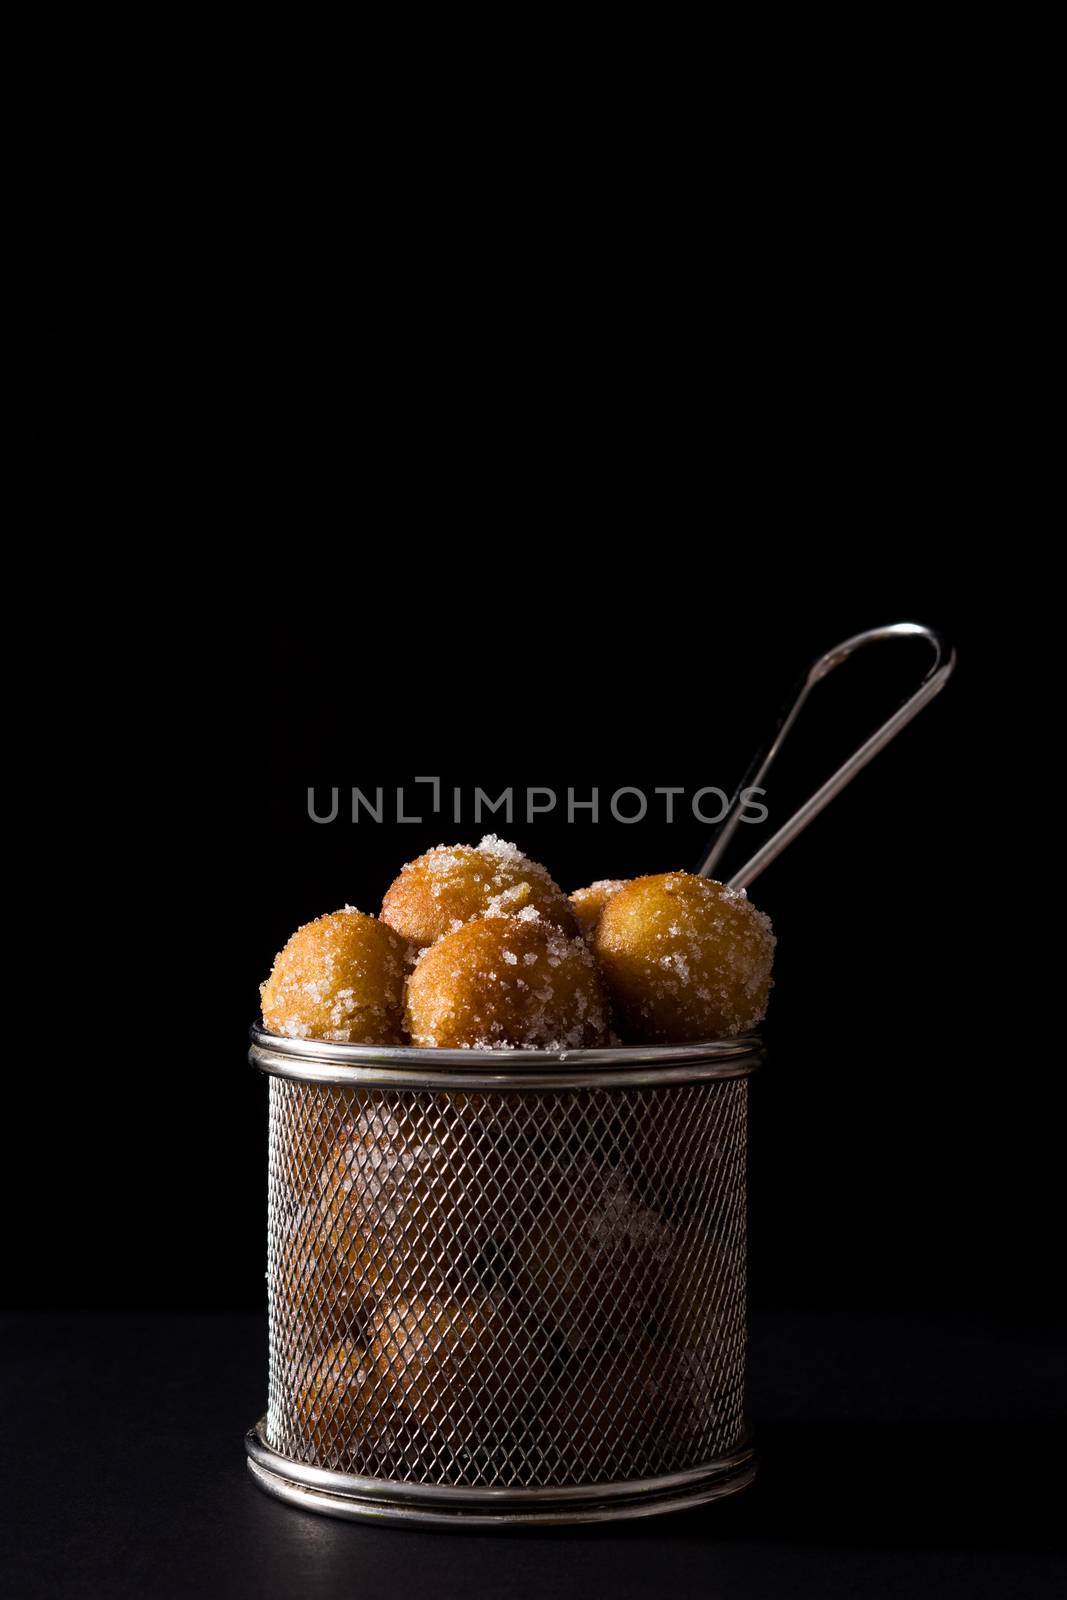 Carnival fritters or buñuelos de viento for holy week on black background